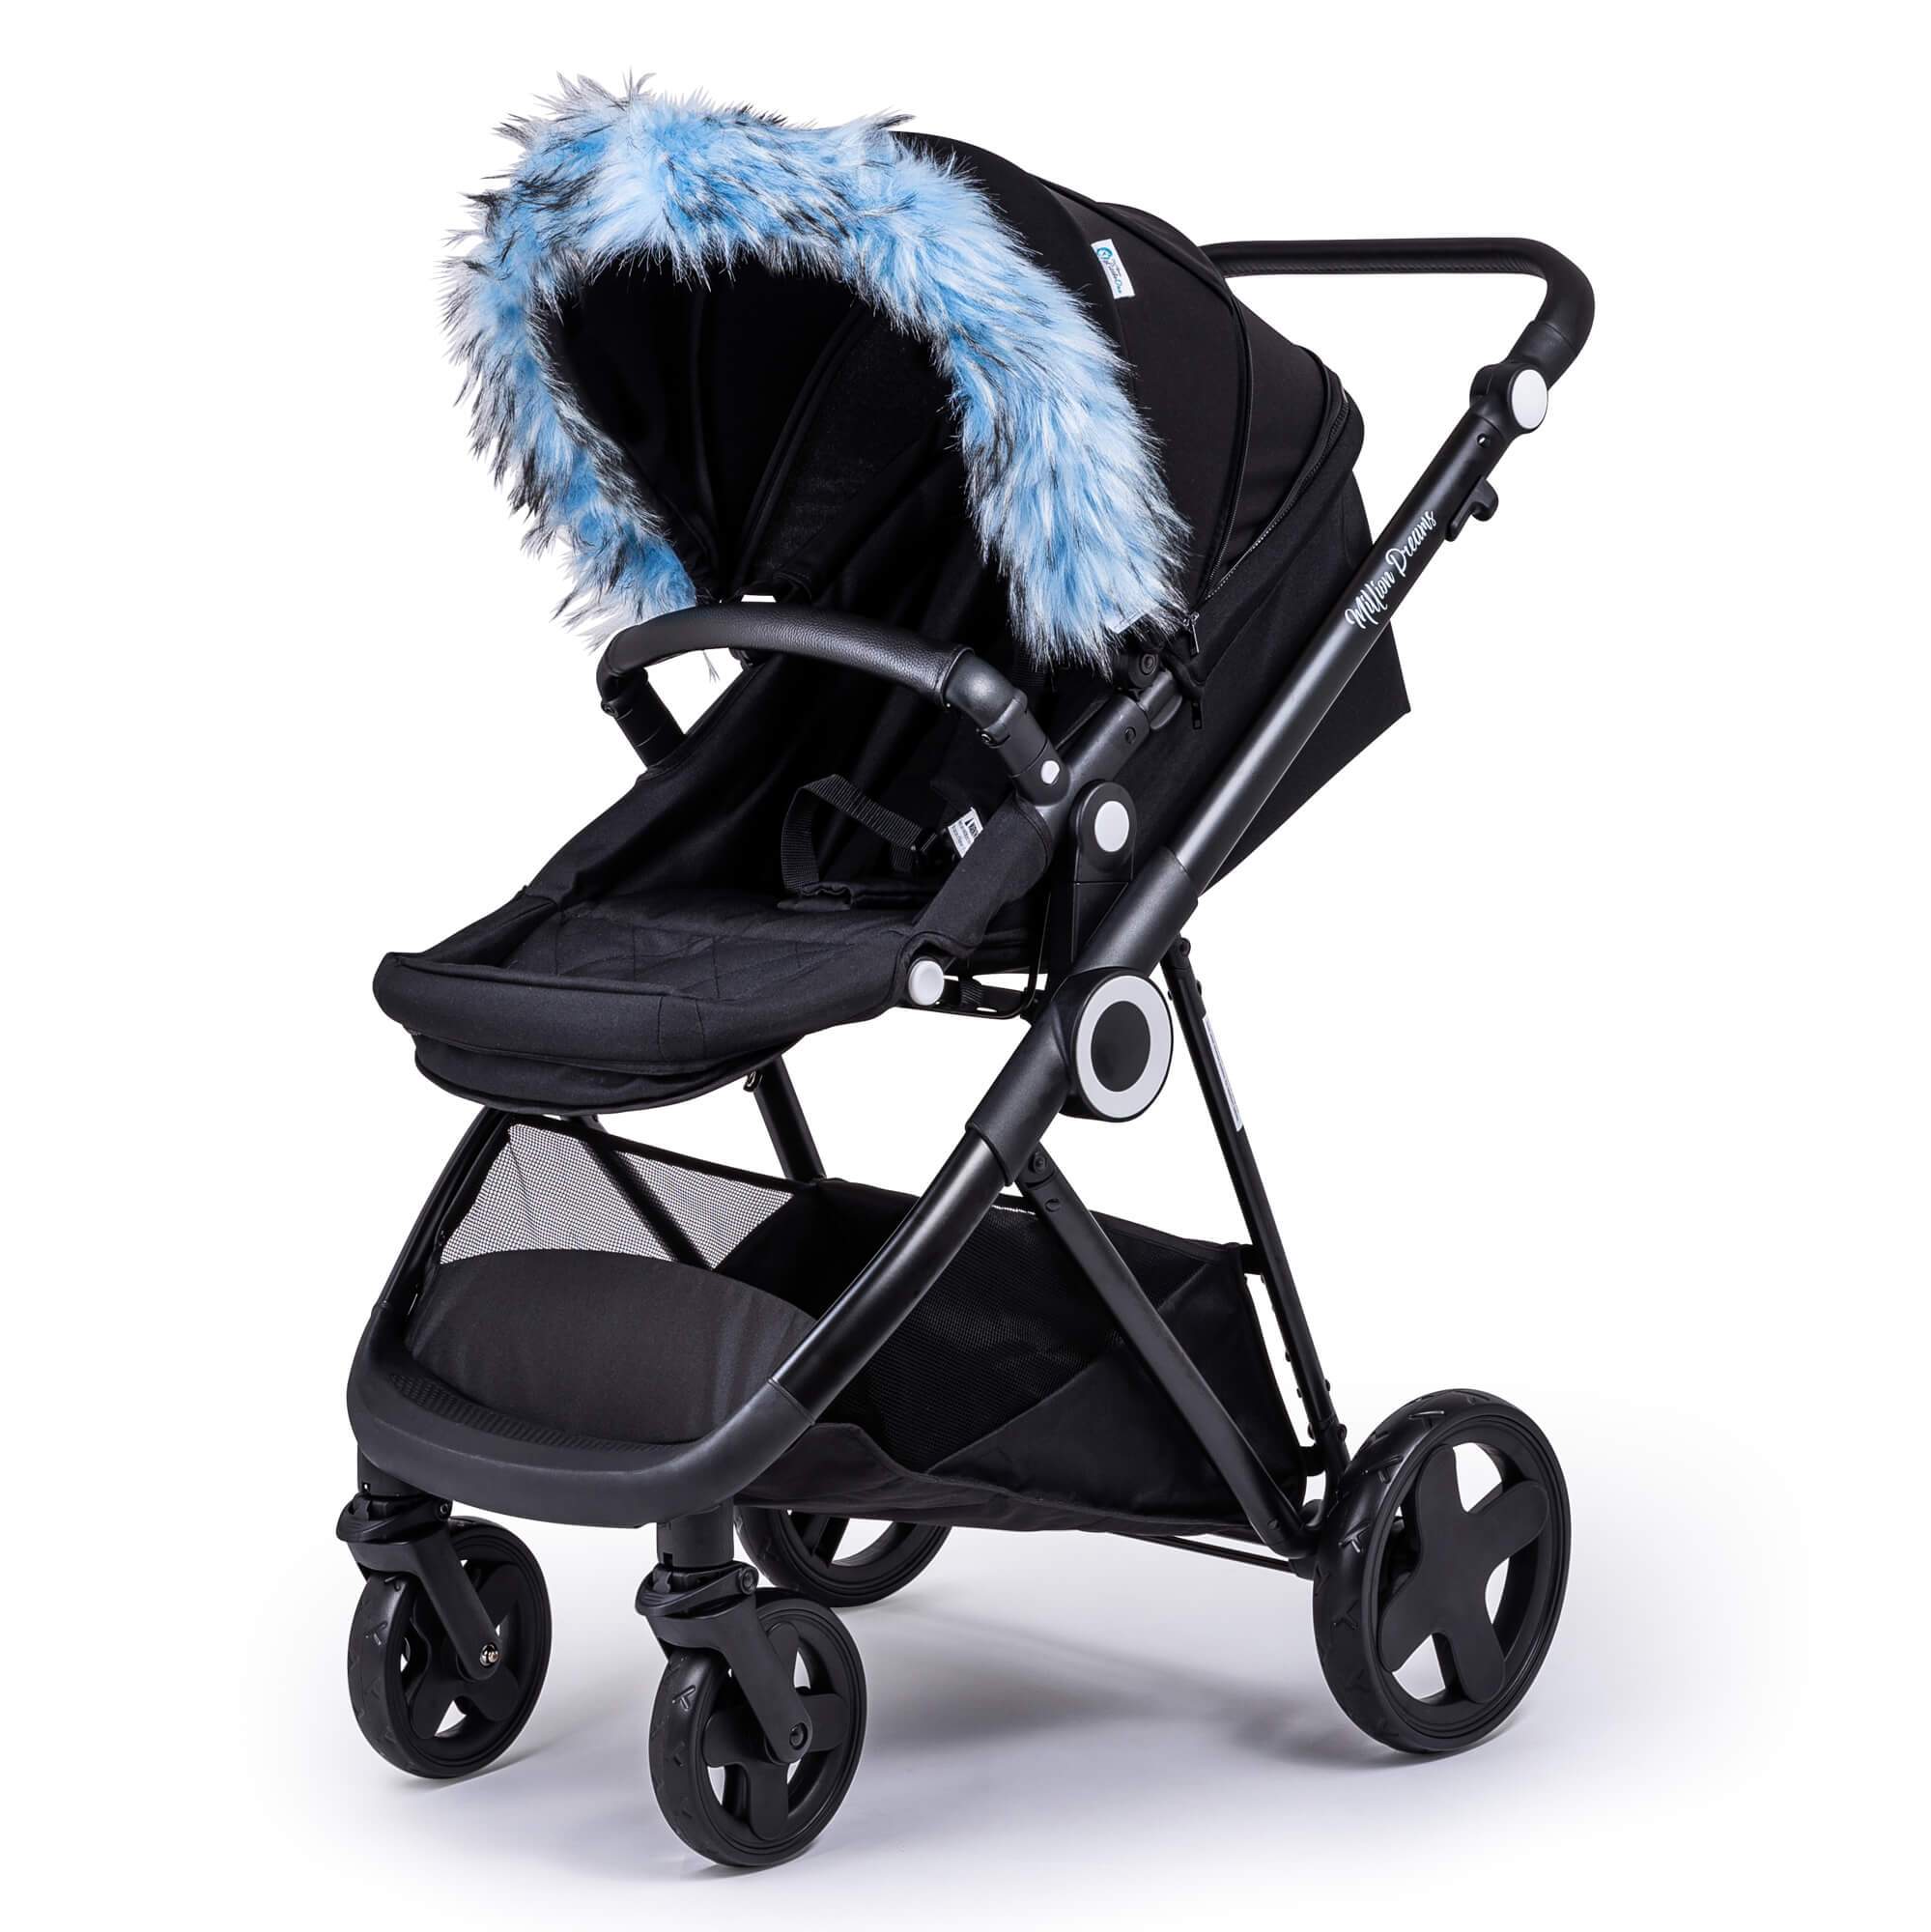 Pram Fur Hood Trim Attachment For Pushchair Compatible with Kinderkraft - For Your Little One